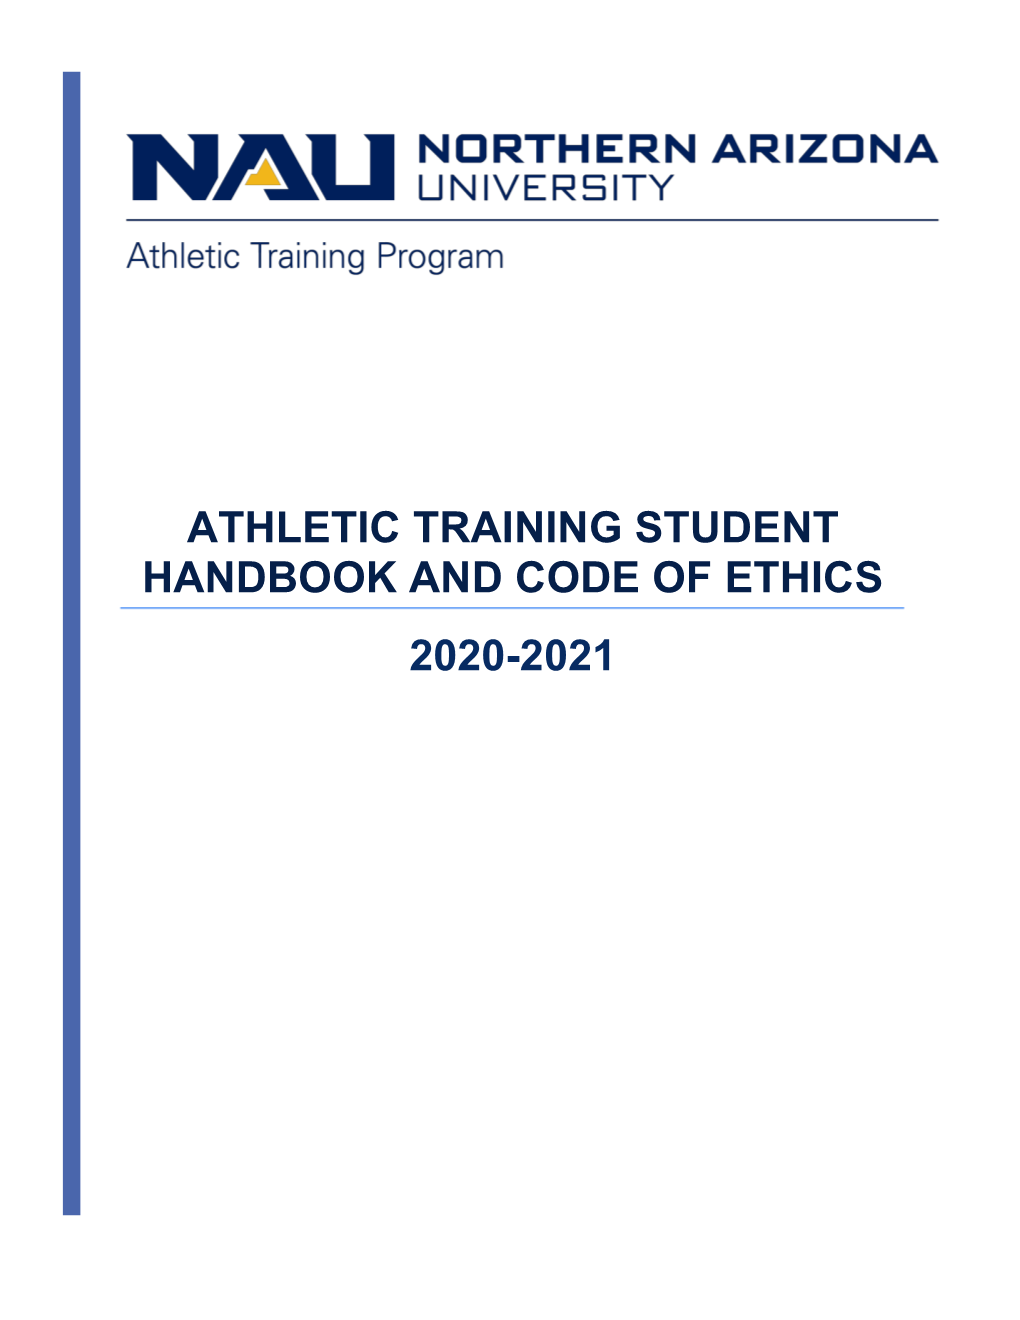 Athletic Training Student Handbook and Code of Ethics 2020-2021